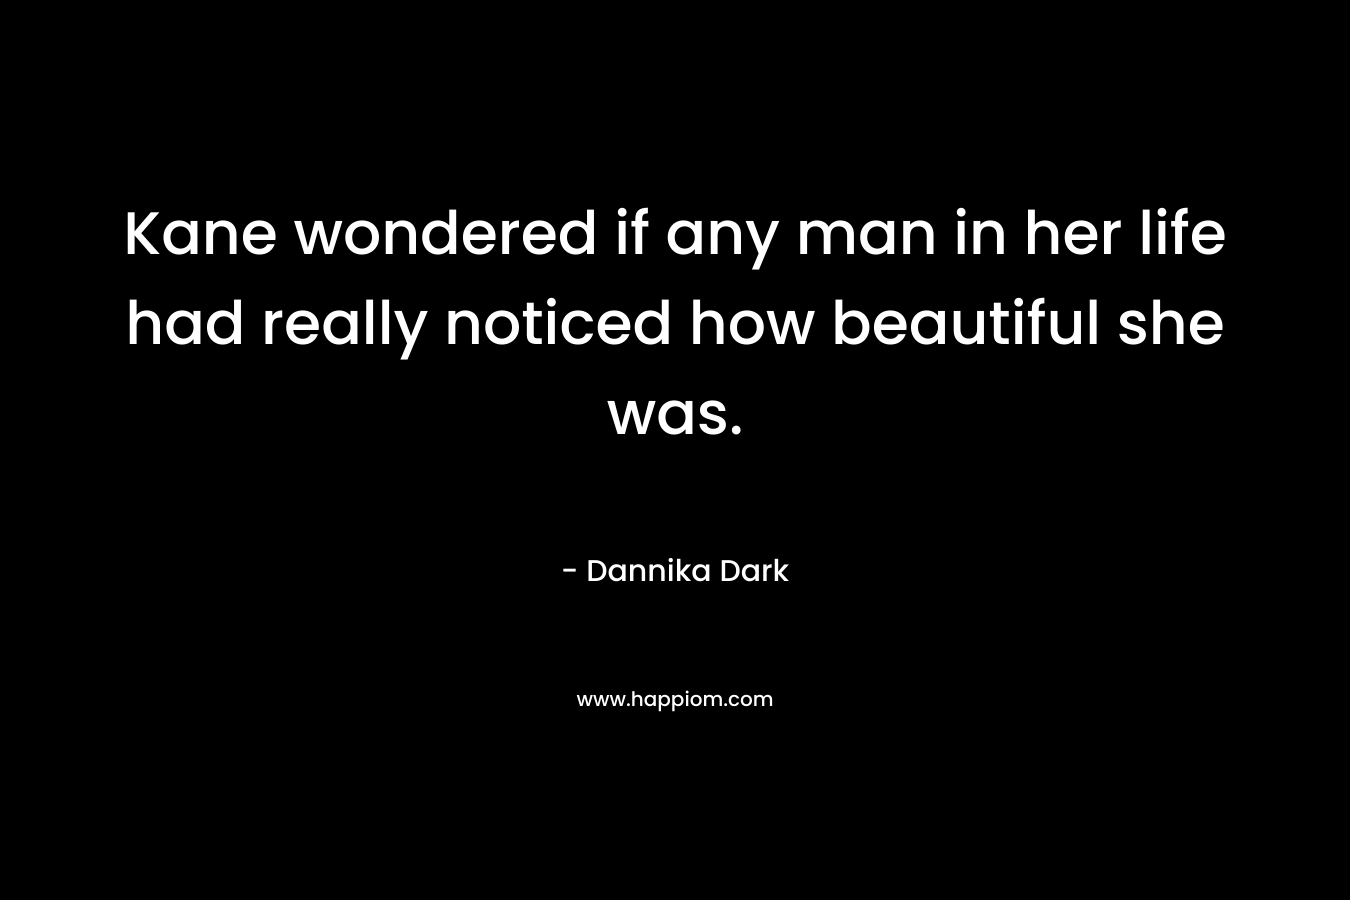 Kane wondered if any man in her life had really noticed how beautiful she was. – Dannika Dark